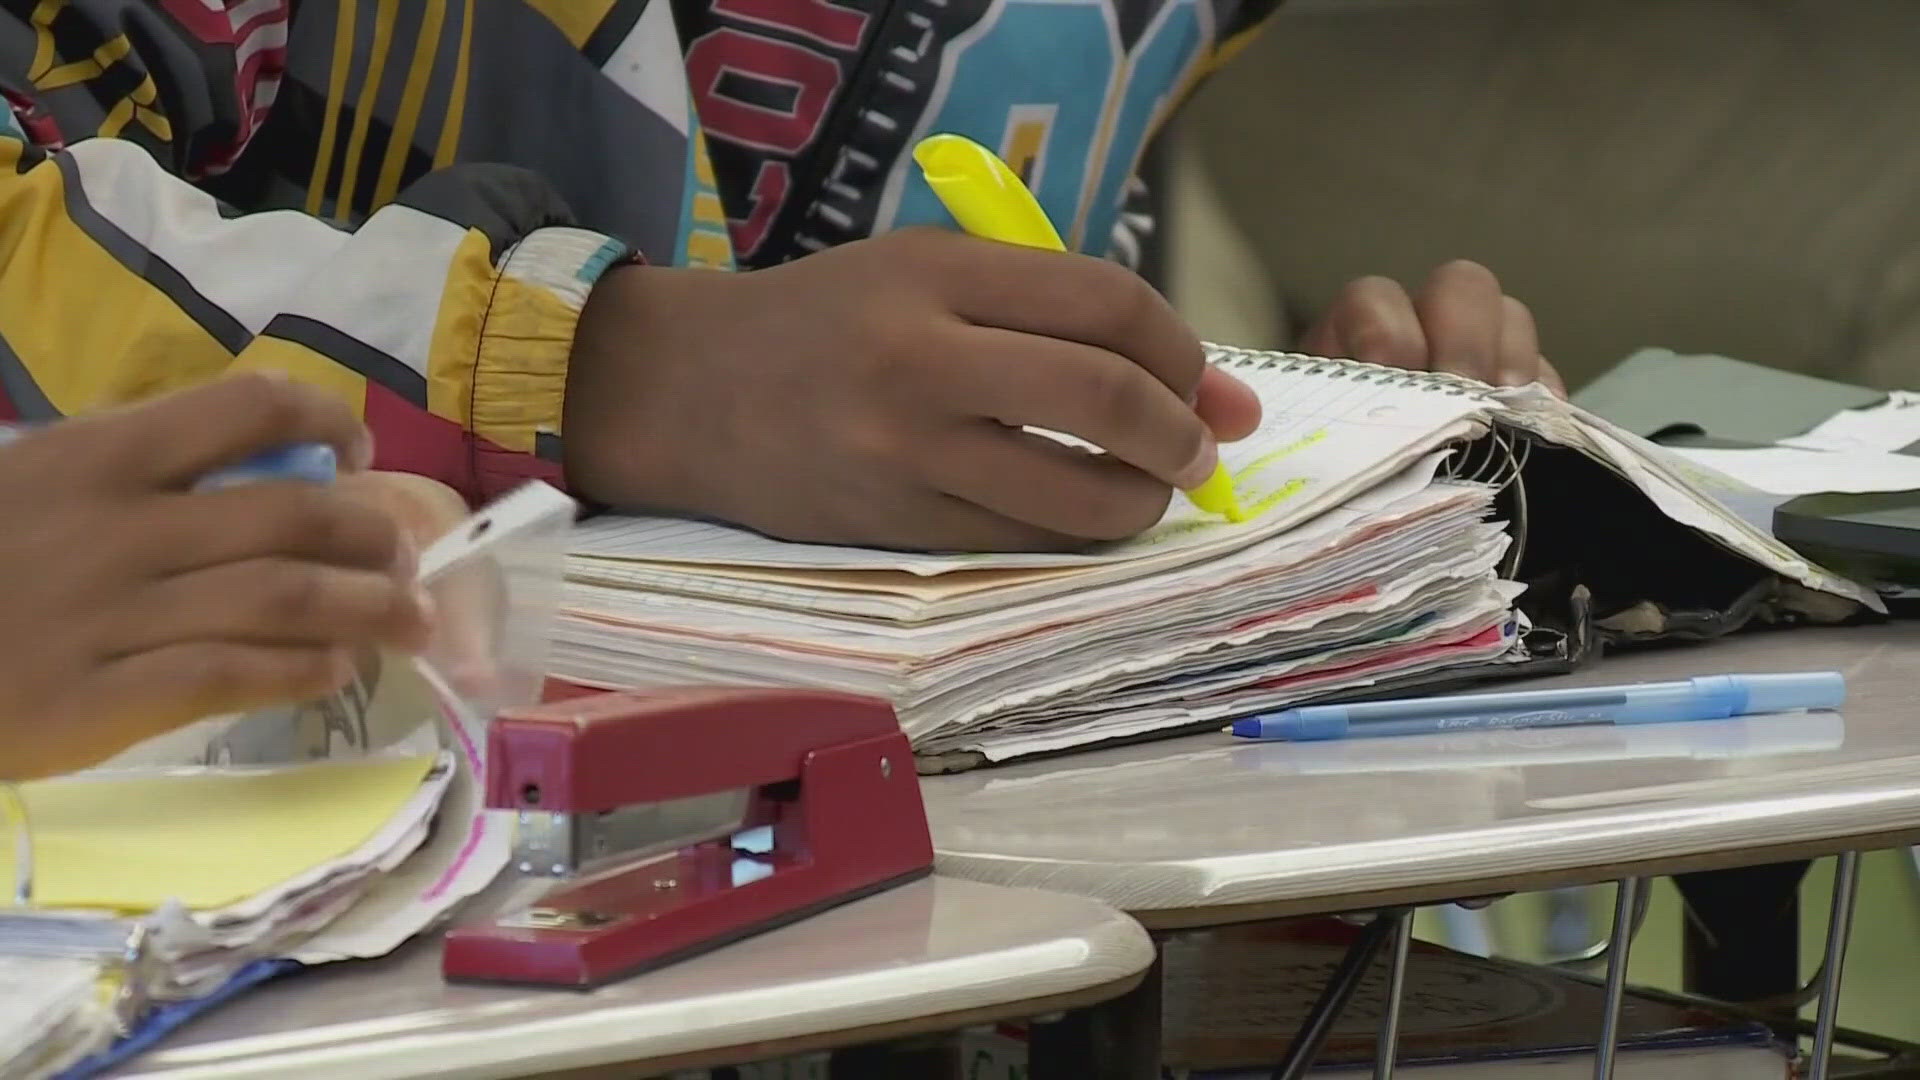 A new law in Louisiana gives parents the decision on where to spend the tax dollars that pay for their child's education. There are still some unknowns.